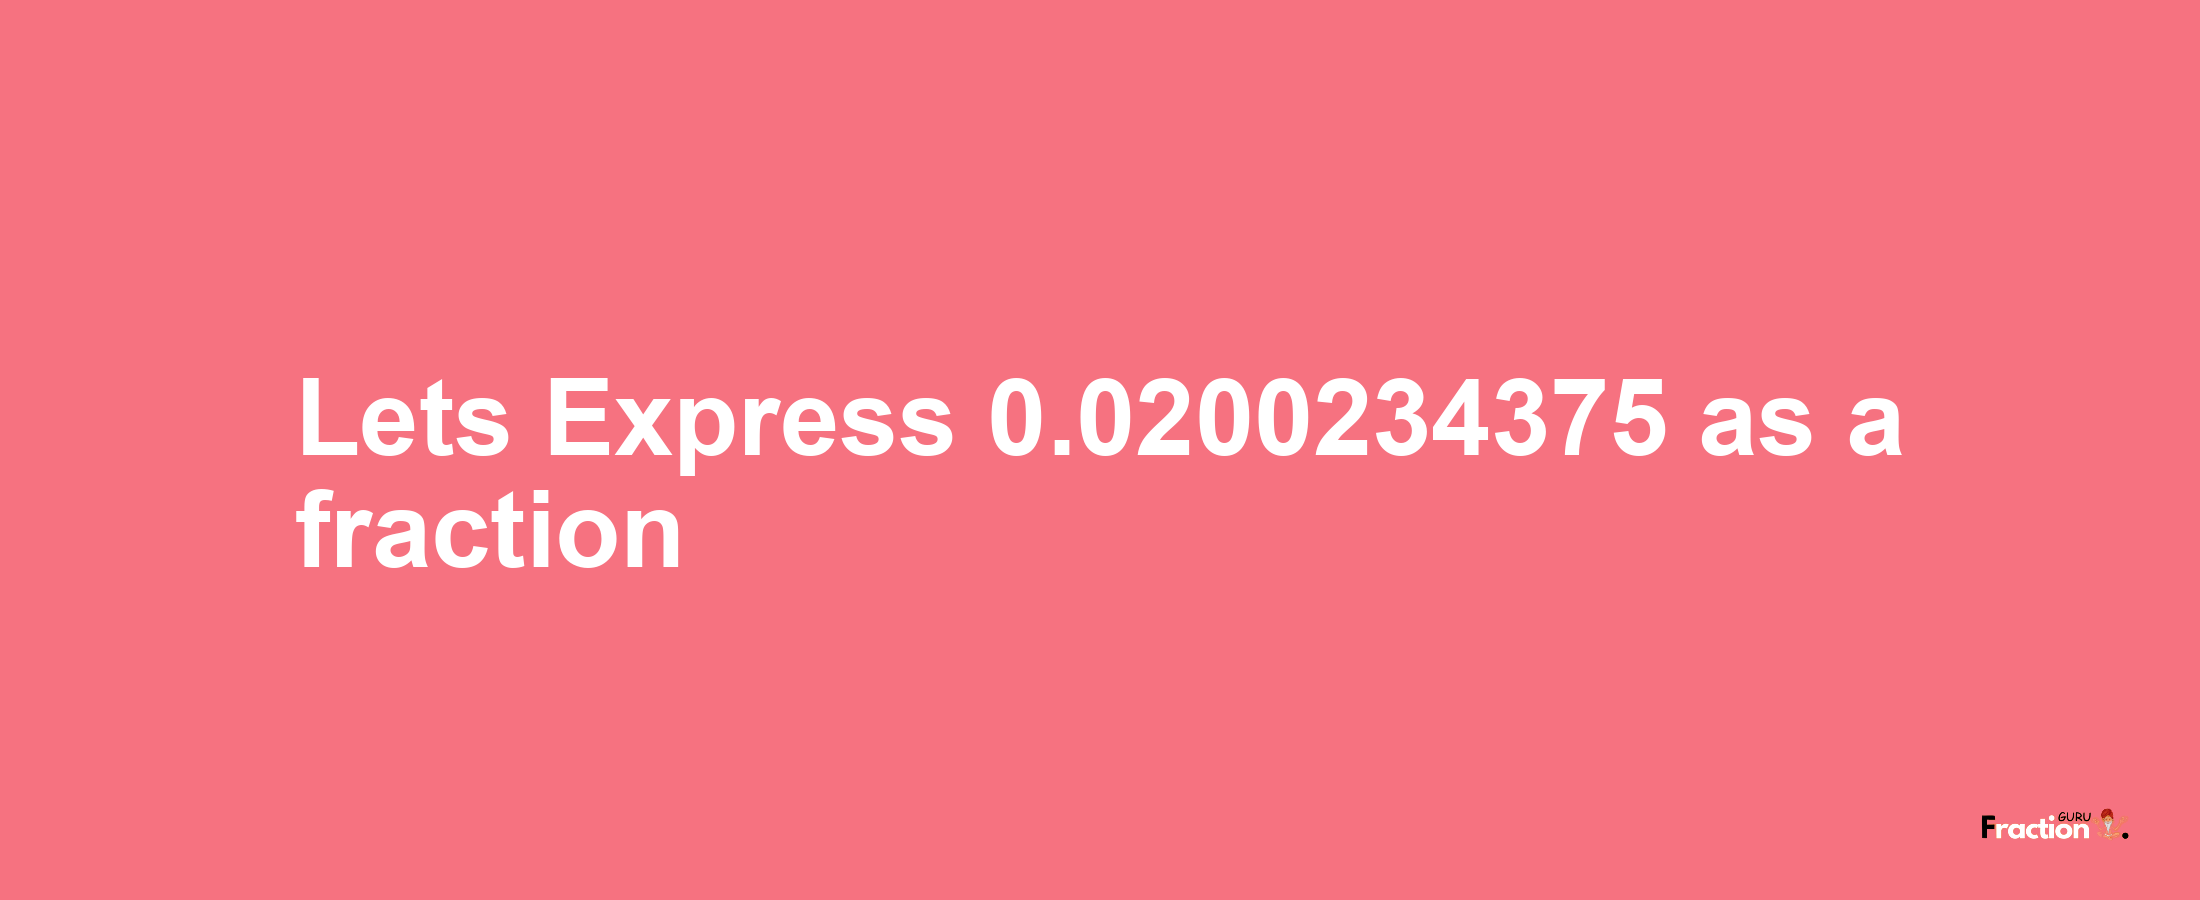 Lets Express 0.0200234375 as afraction